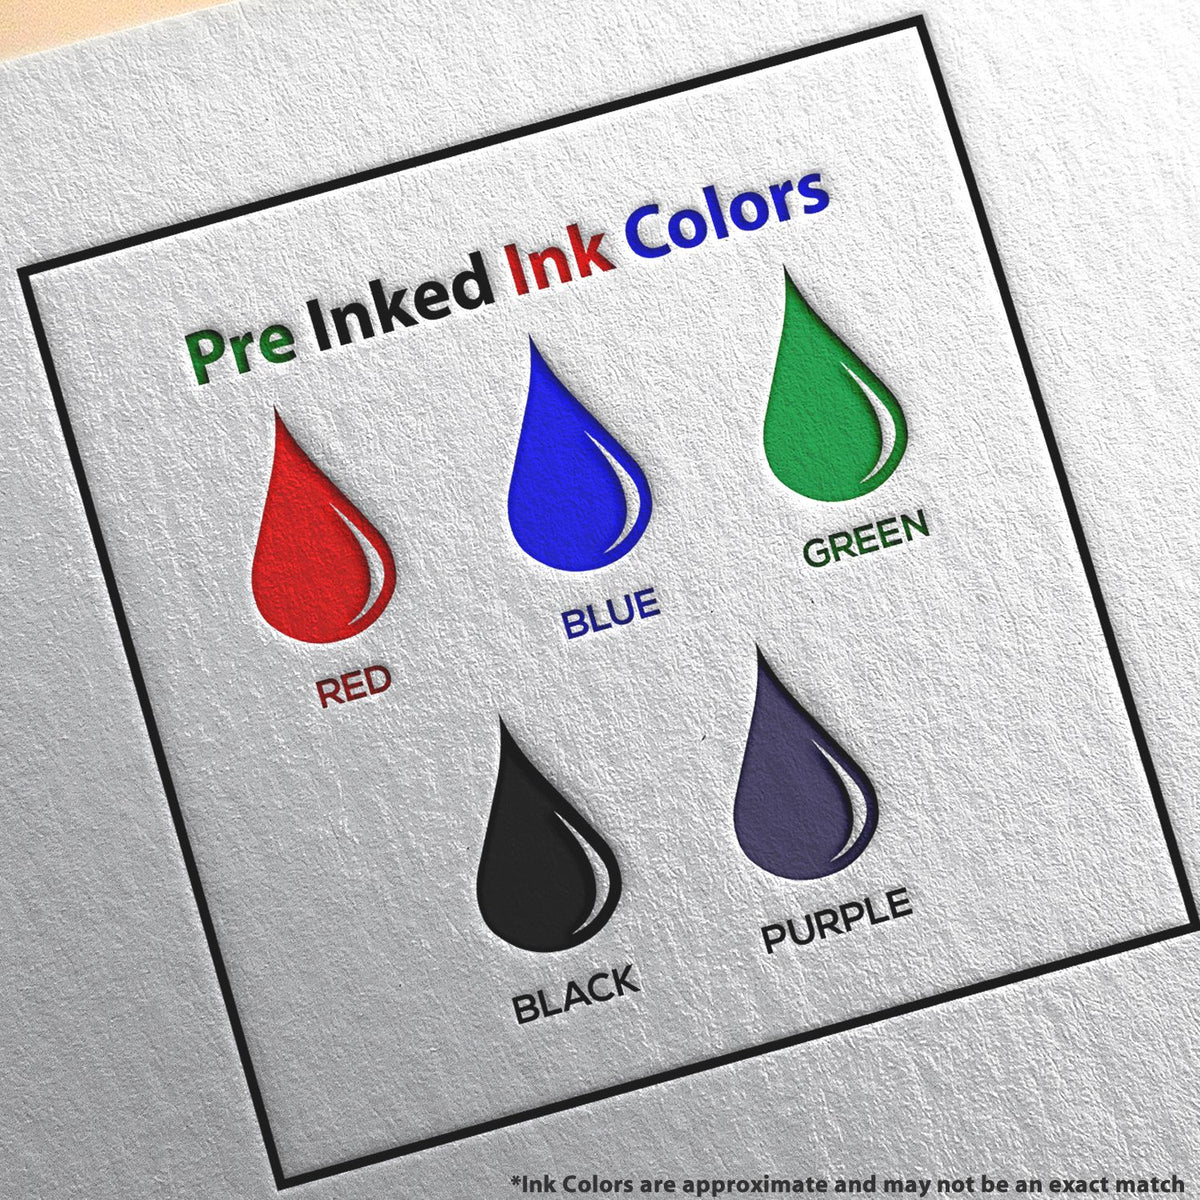 A picture showing the different ink colors or hues available for the Super Slim Missouri Notary Public Stamp product.